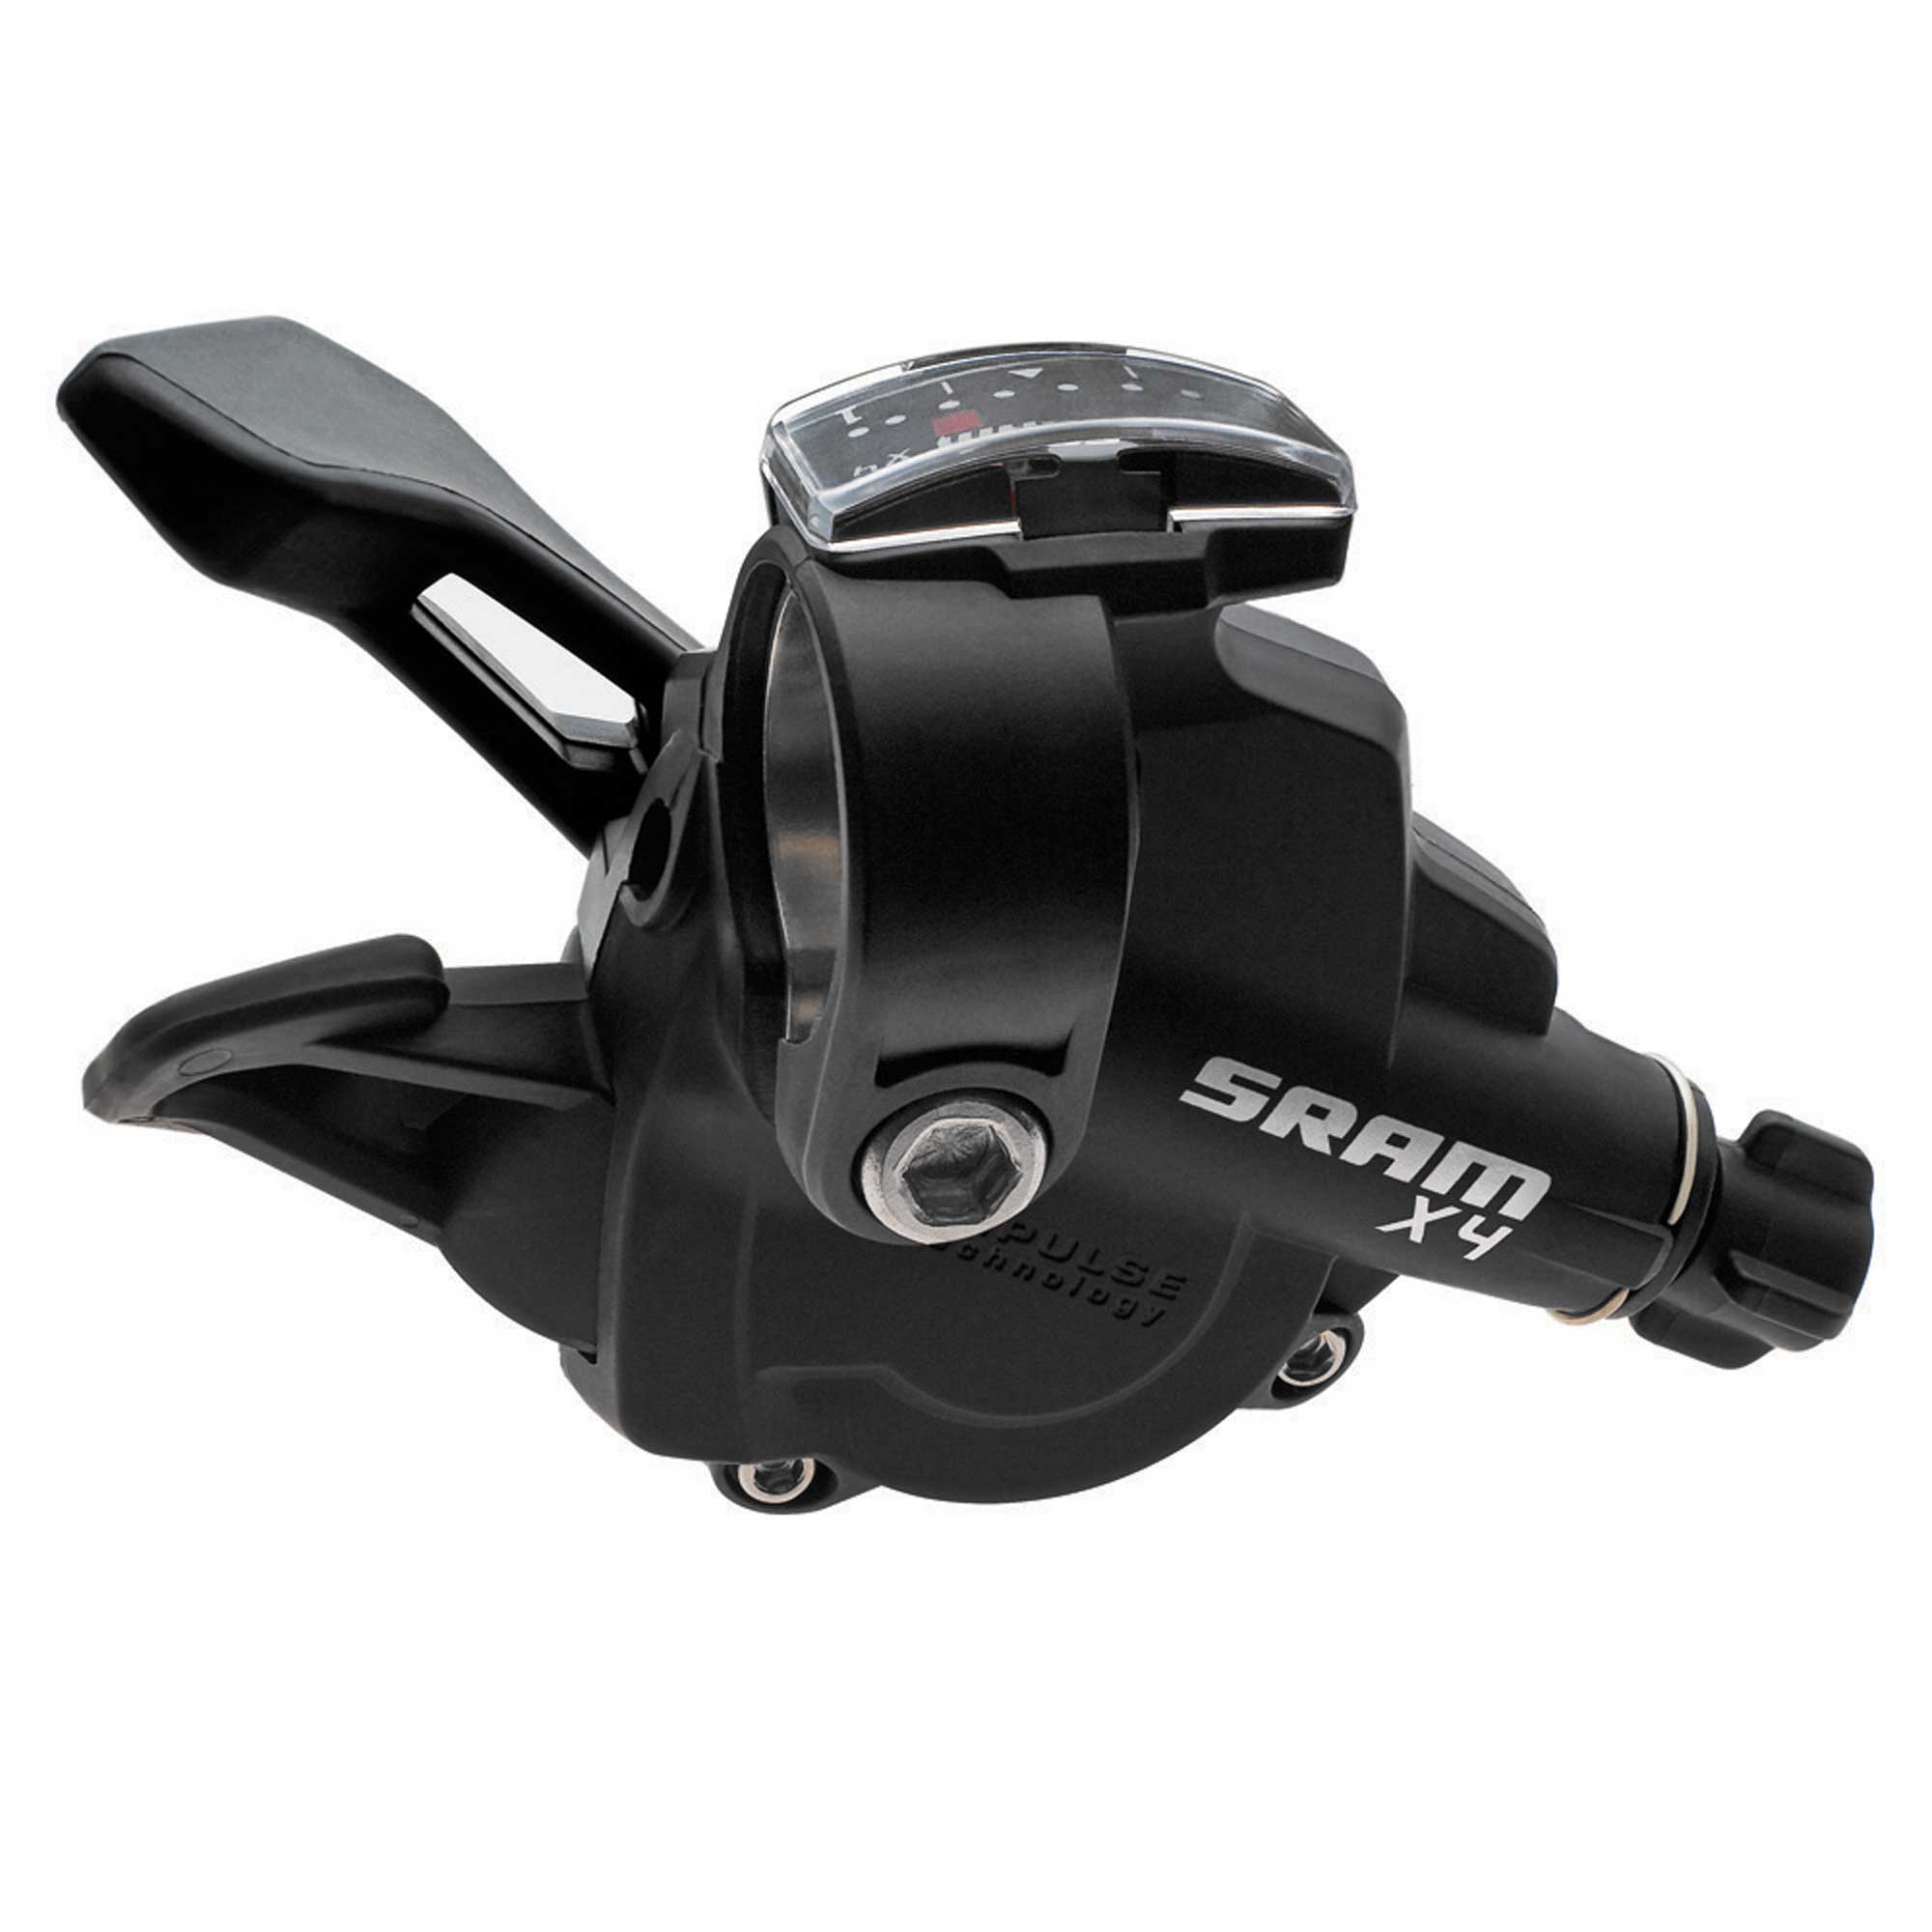 gear shifters for mountain bikes